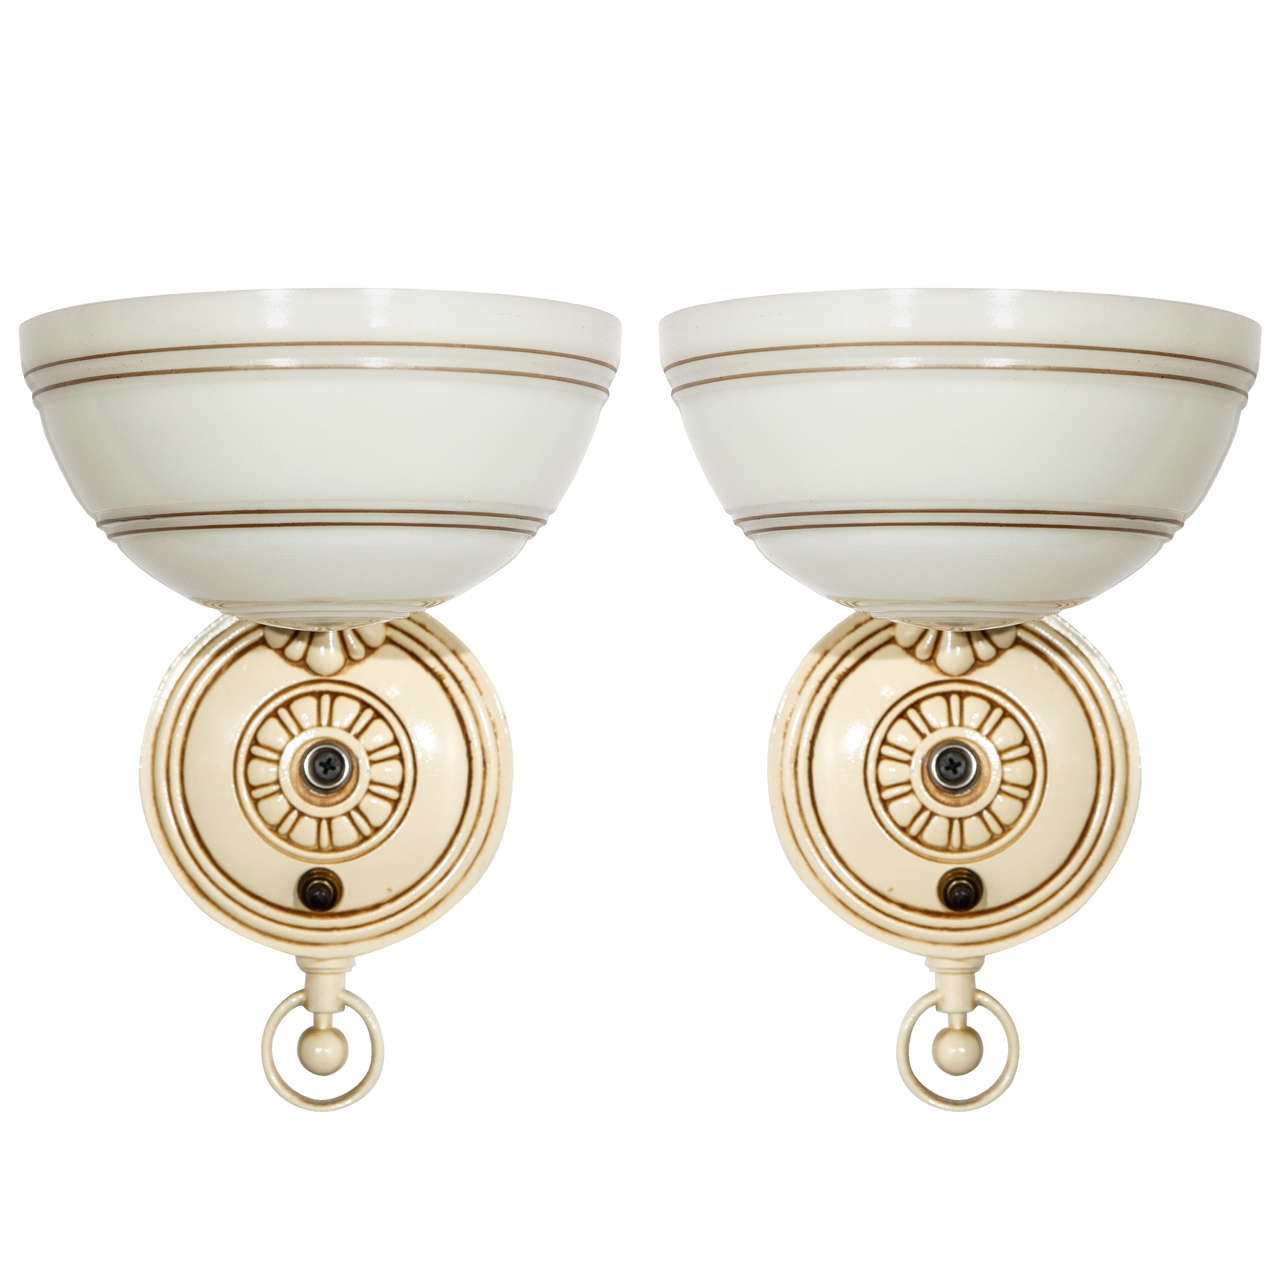 Pair of Deco Sconces by Markel